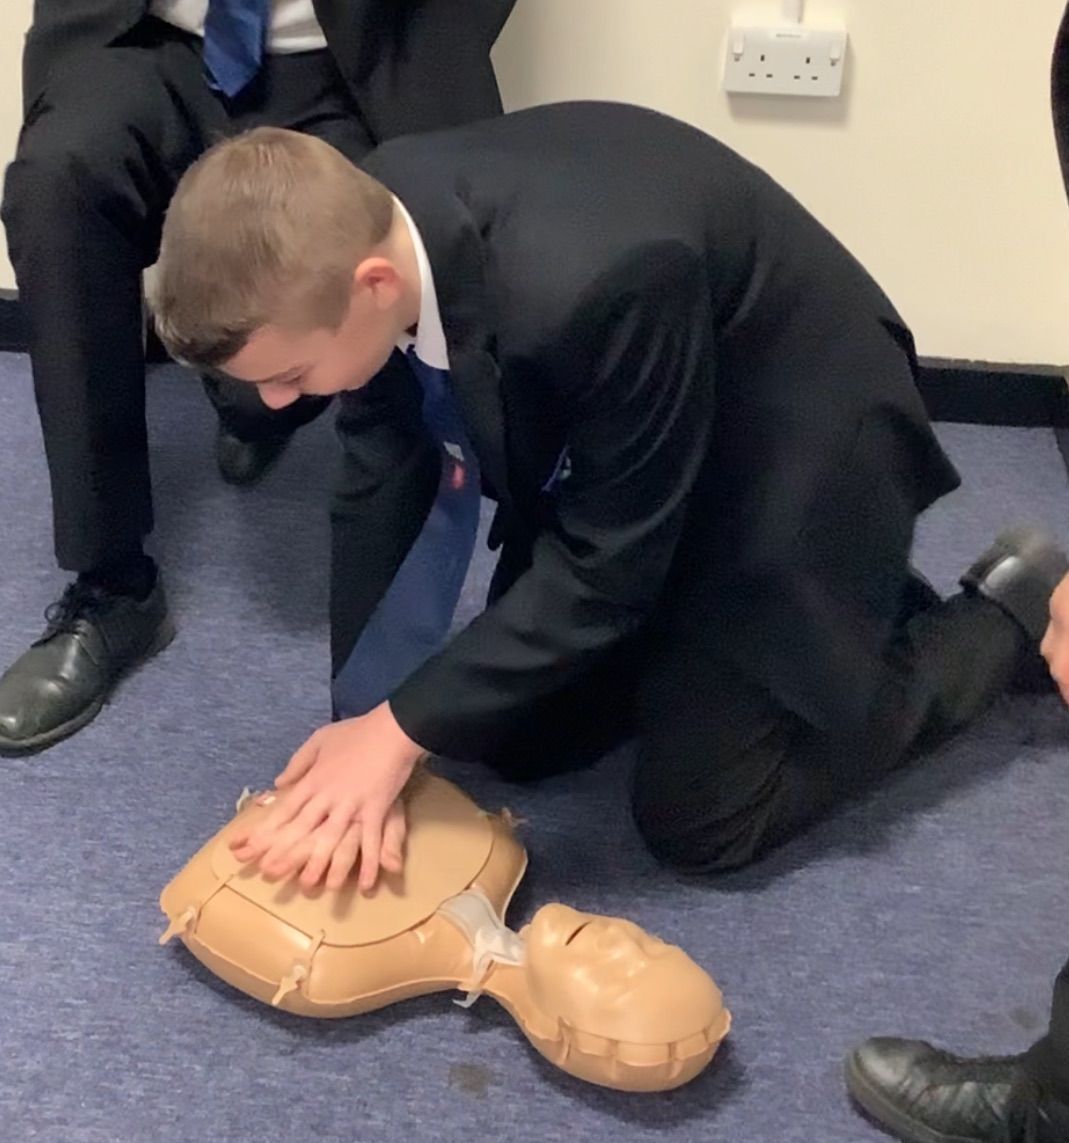 Year 9 students, in their PDT lessons, are currently learning how to complete effective CPR. Mr Morbin, year 9 RSL, has praised the maturity and engagement of the year group, who are learning such a crucial skill (one that we hope they never need to use). Well done, year 9!